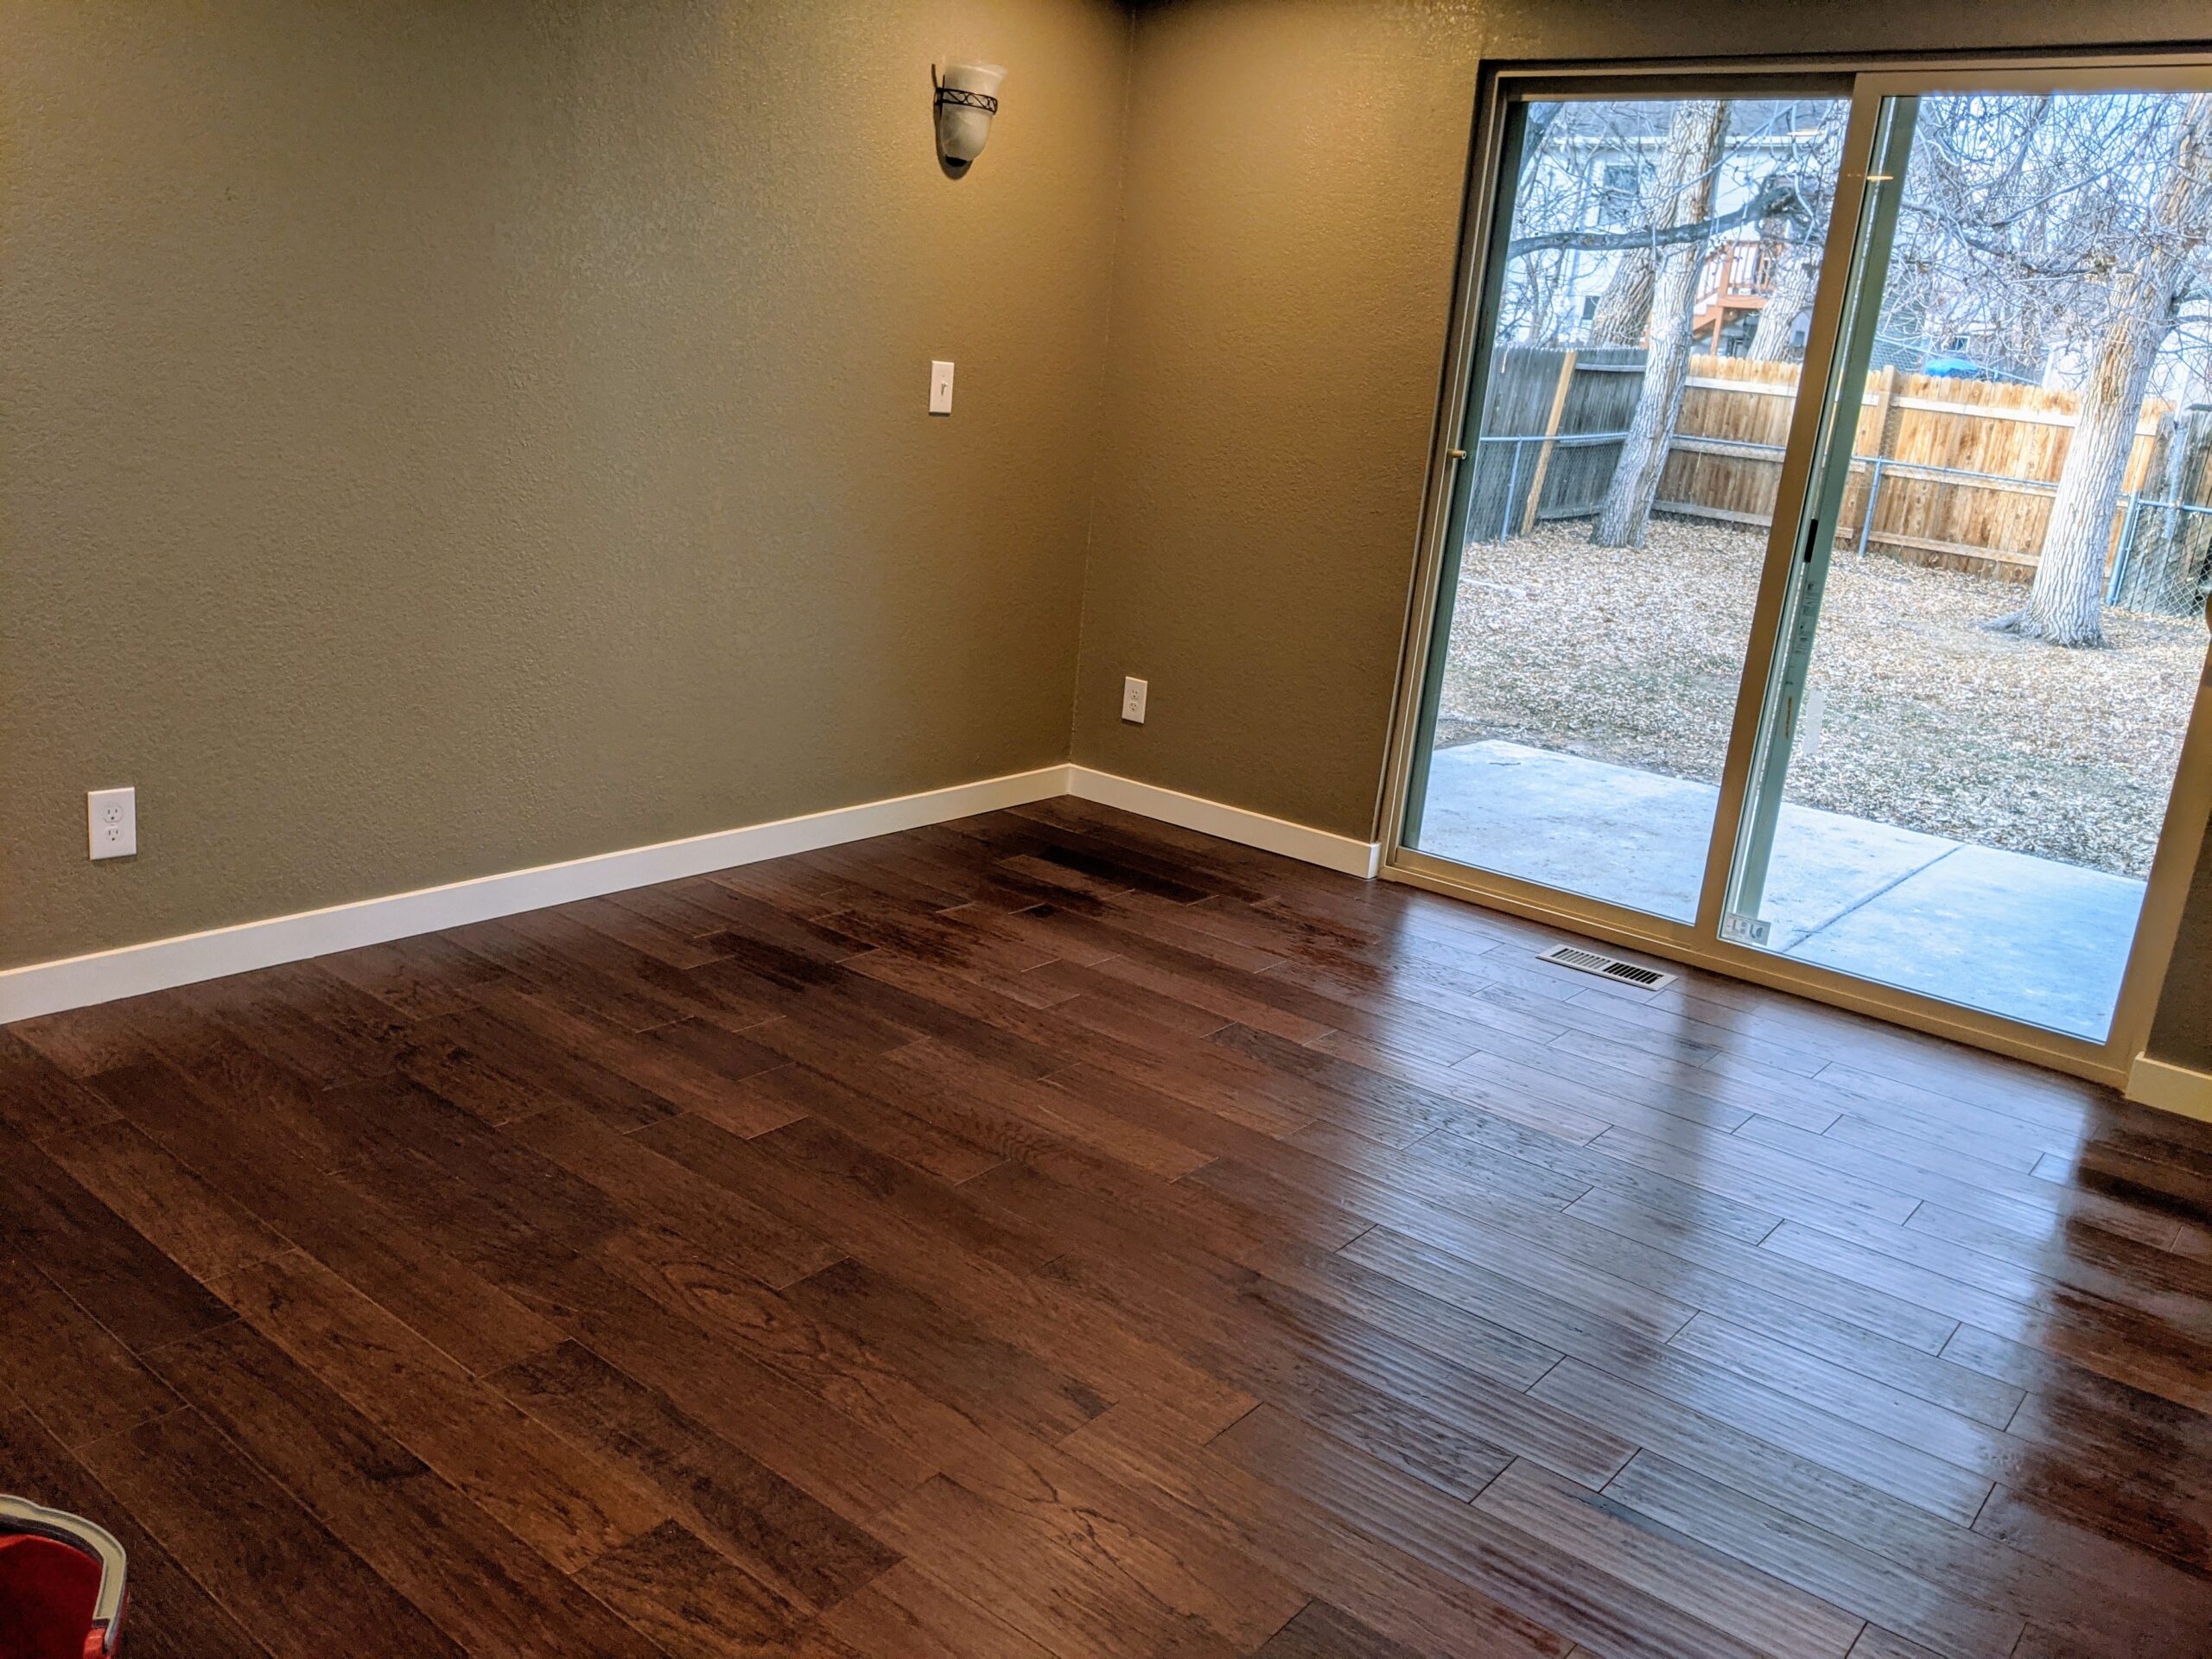 AFTER The engineered hardwood floors look beautiful in our new bedroom!